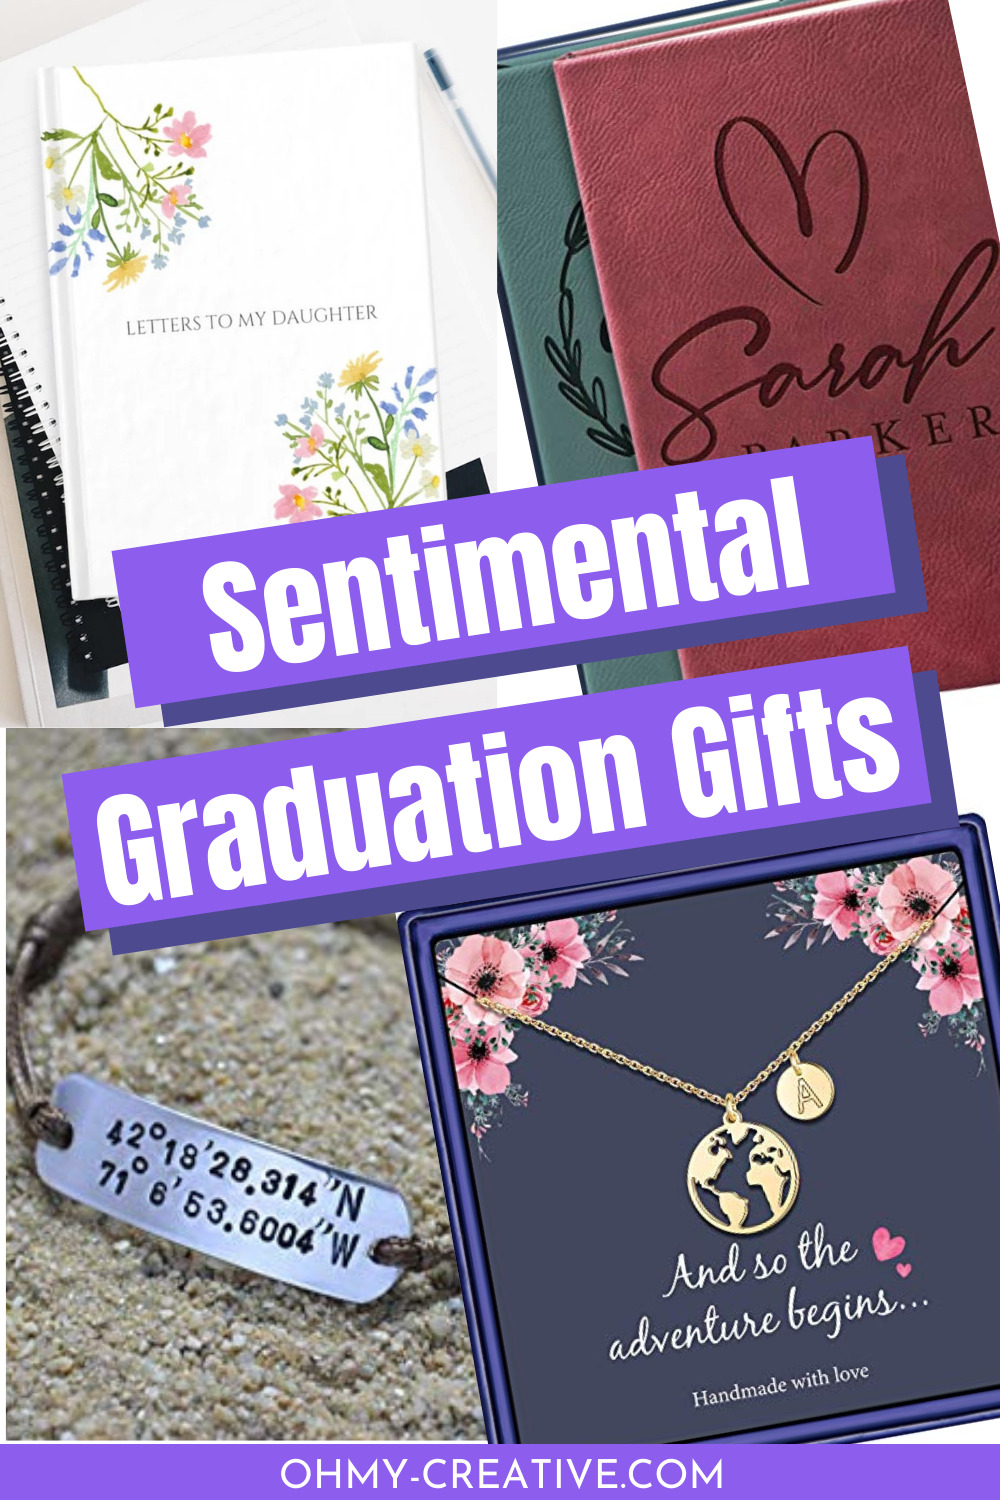 A collage of great sentimental graduation gifts including jewelry, journals and words from mom.